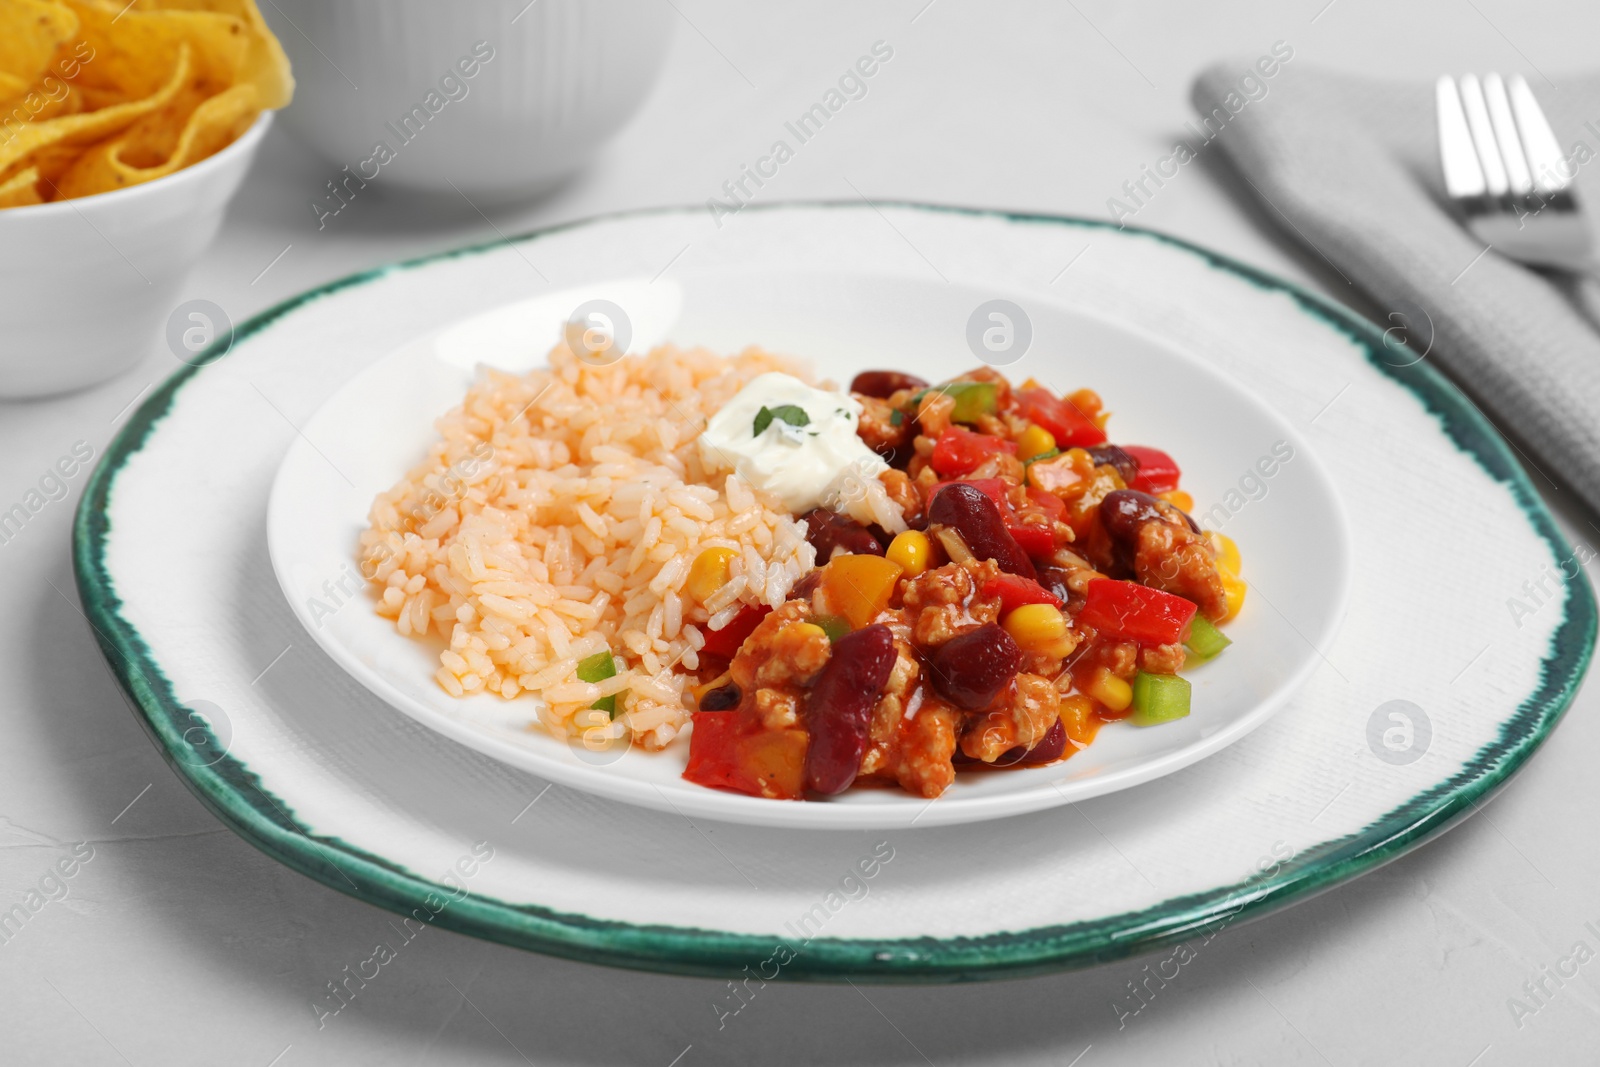 Photo of Chili con carne served with rice and sauce on table